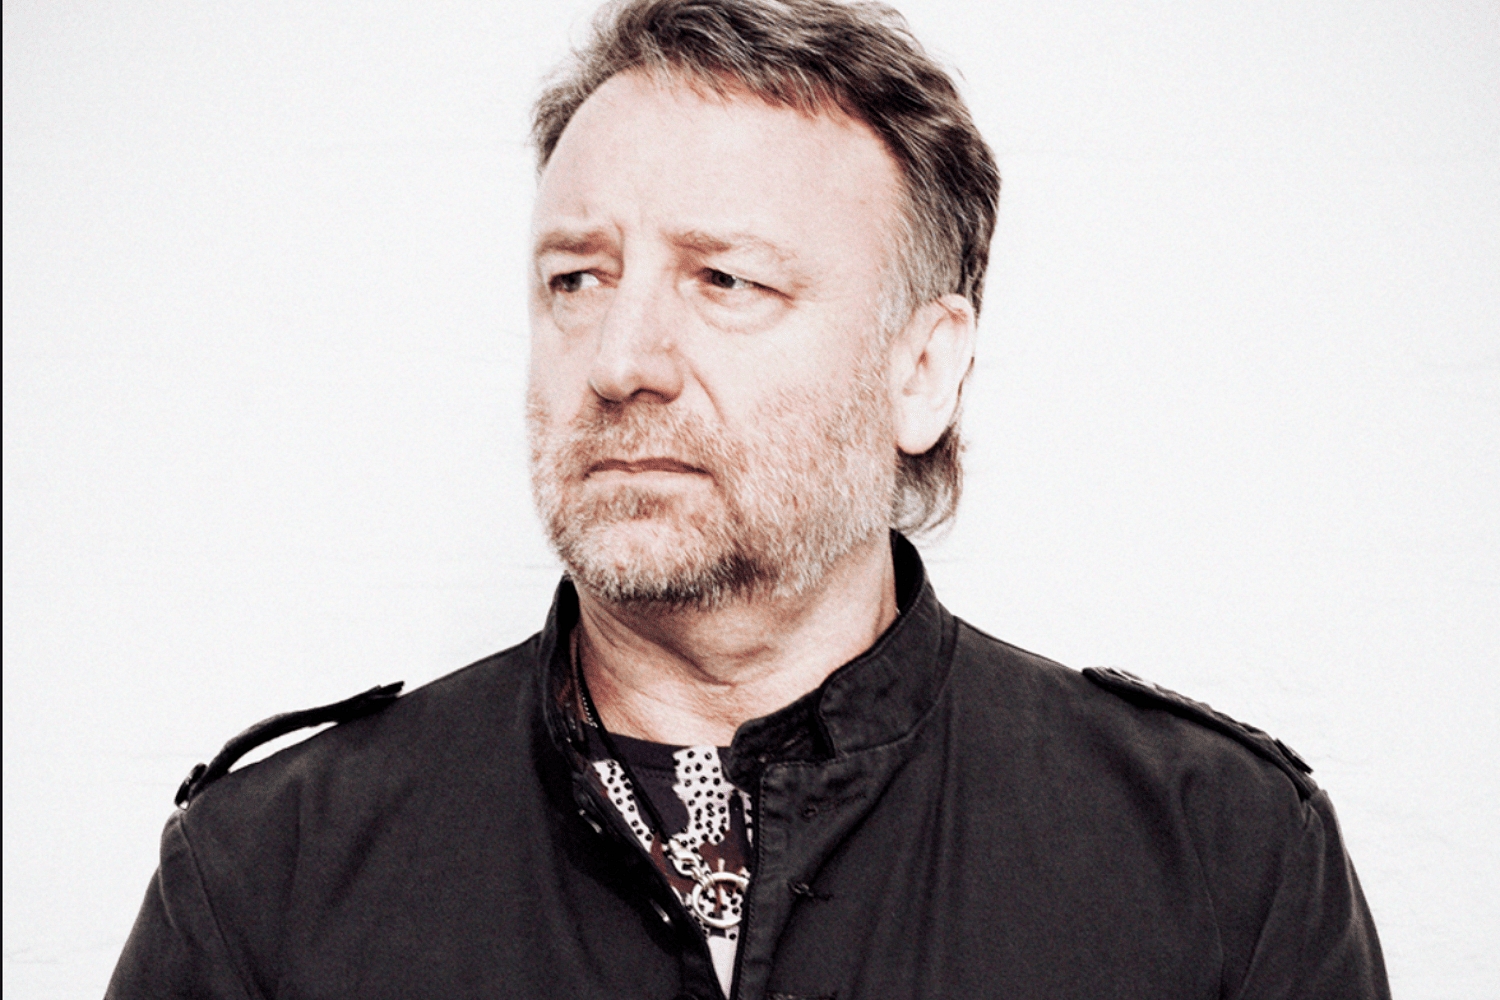 Peter Hook to play Joy Division's 'Unknown Pleasures' and 'Closer' in full at special UK shows